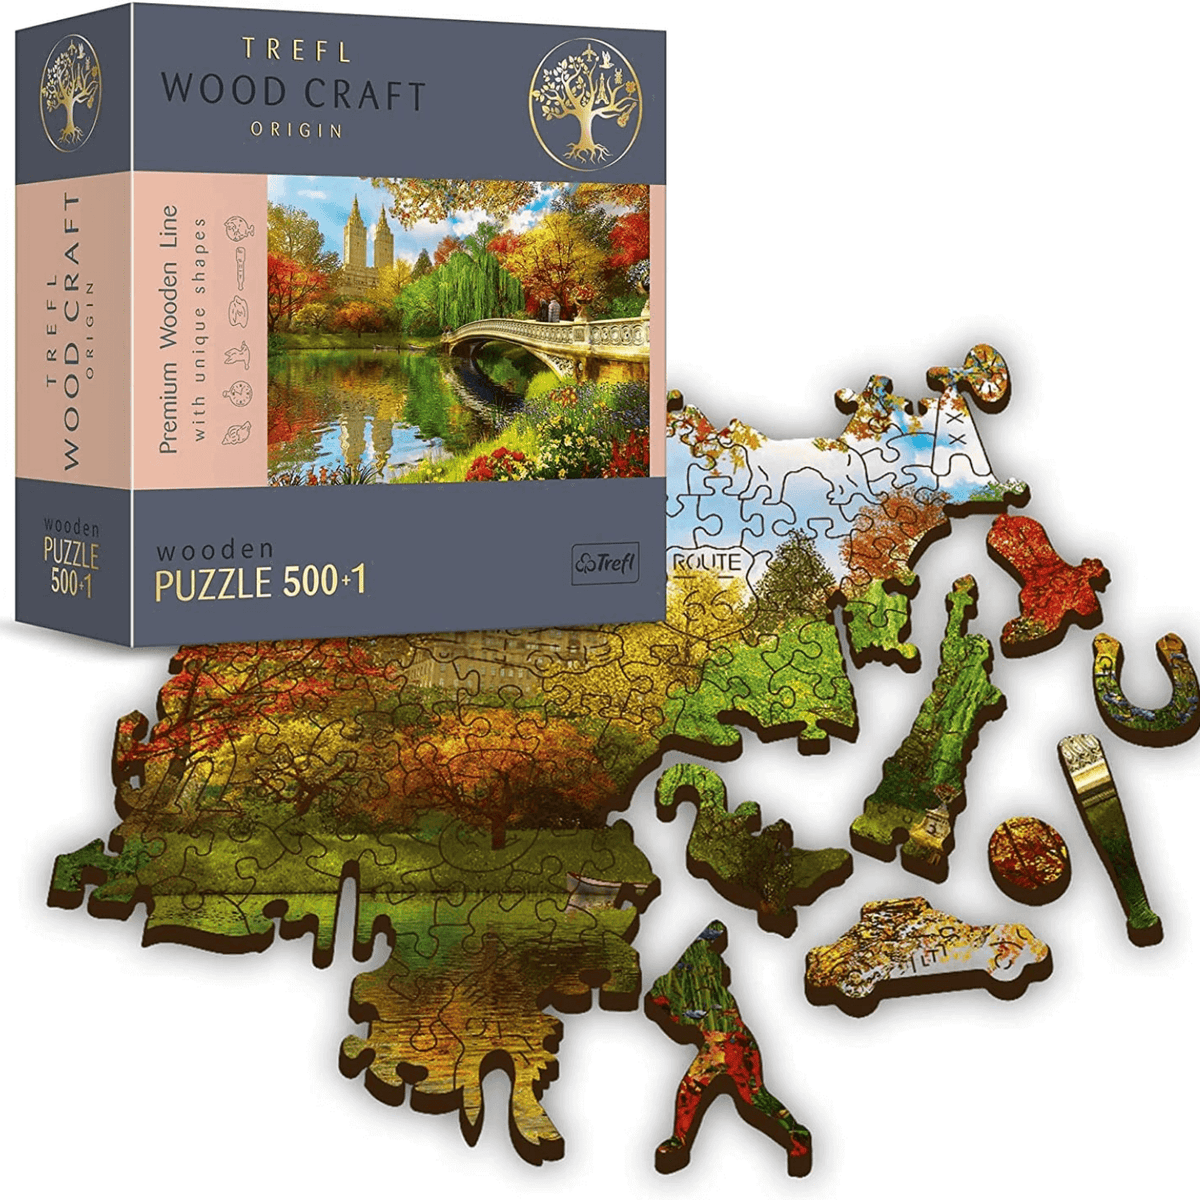 Central Park, New York | Wooden Puzzle 500+1-Wooden Puzzle-TREFL--